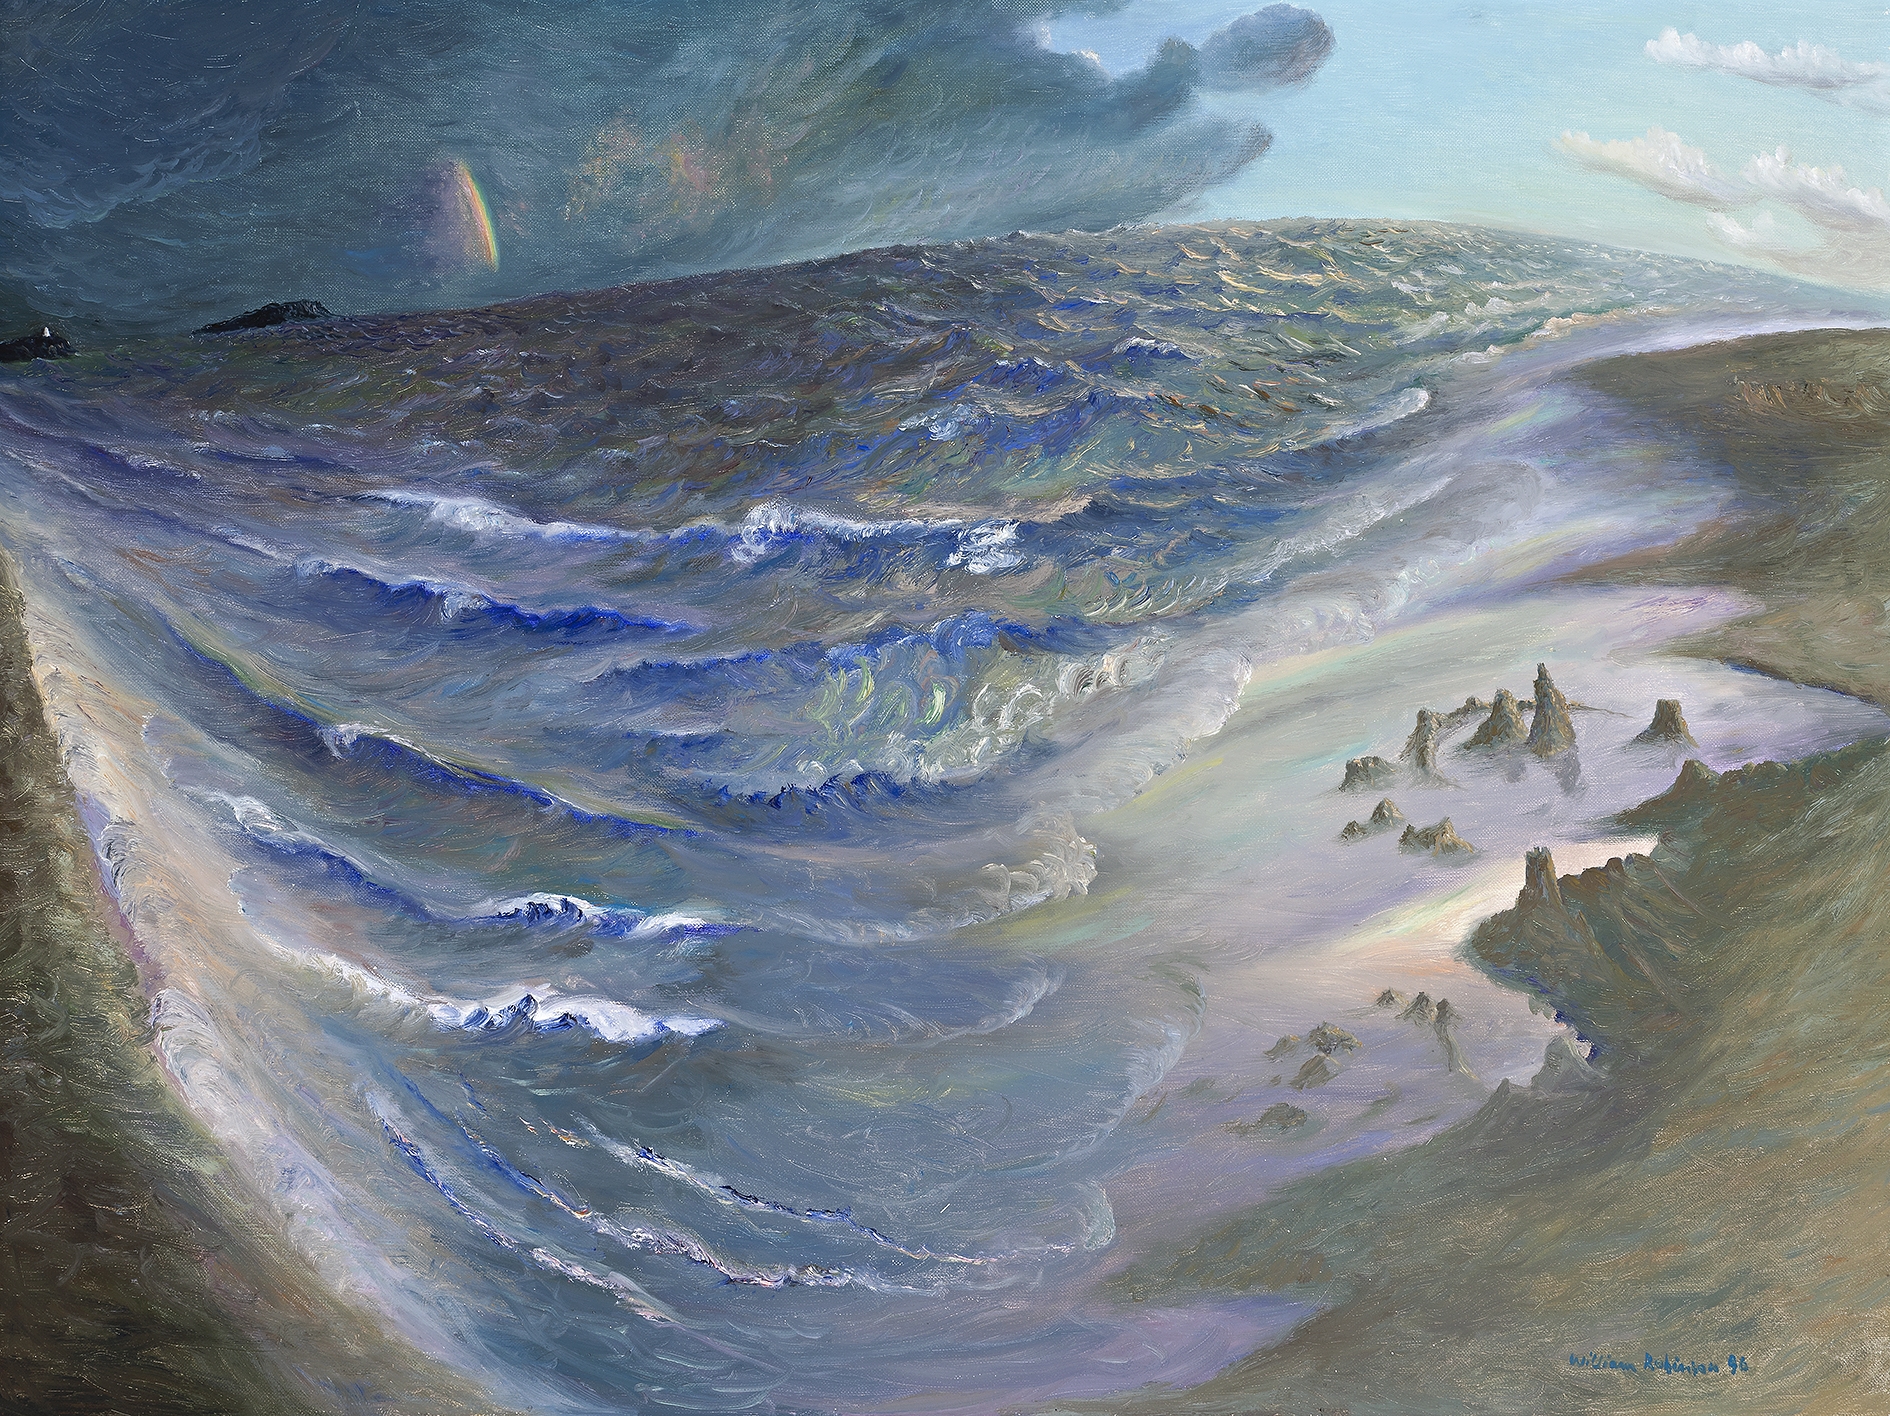 Clearing Storm to Fingal by William Robinson, 1996